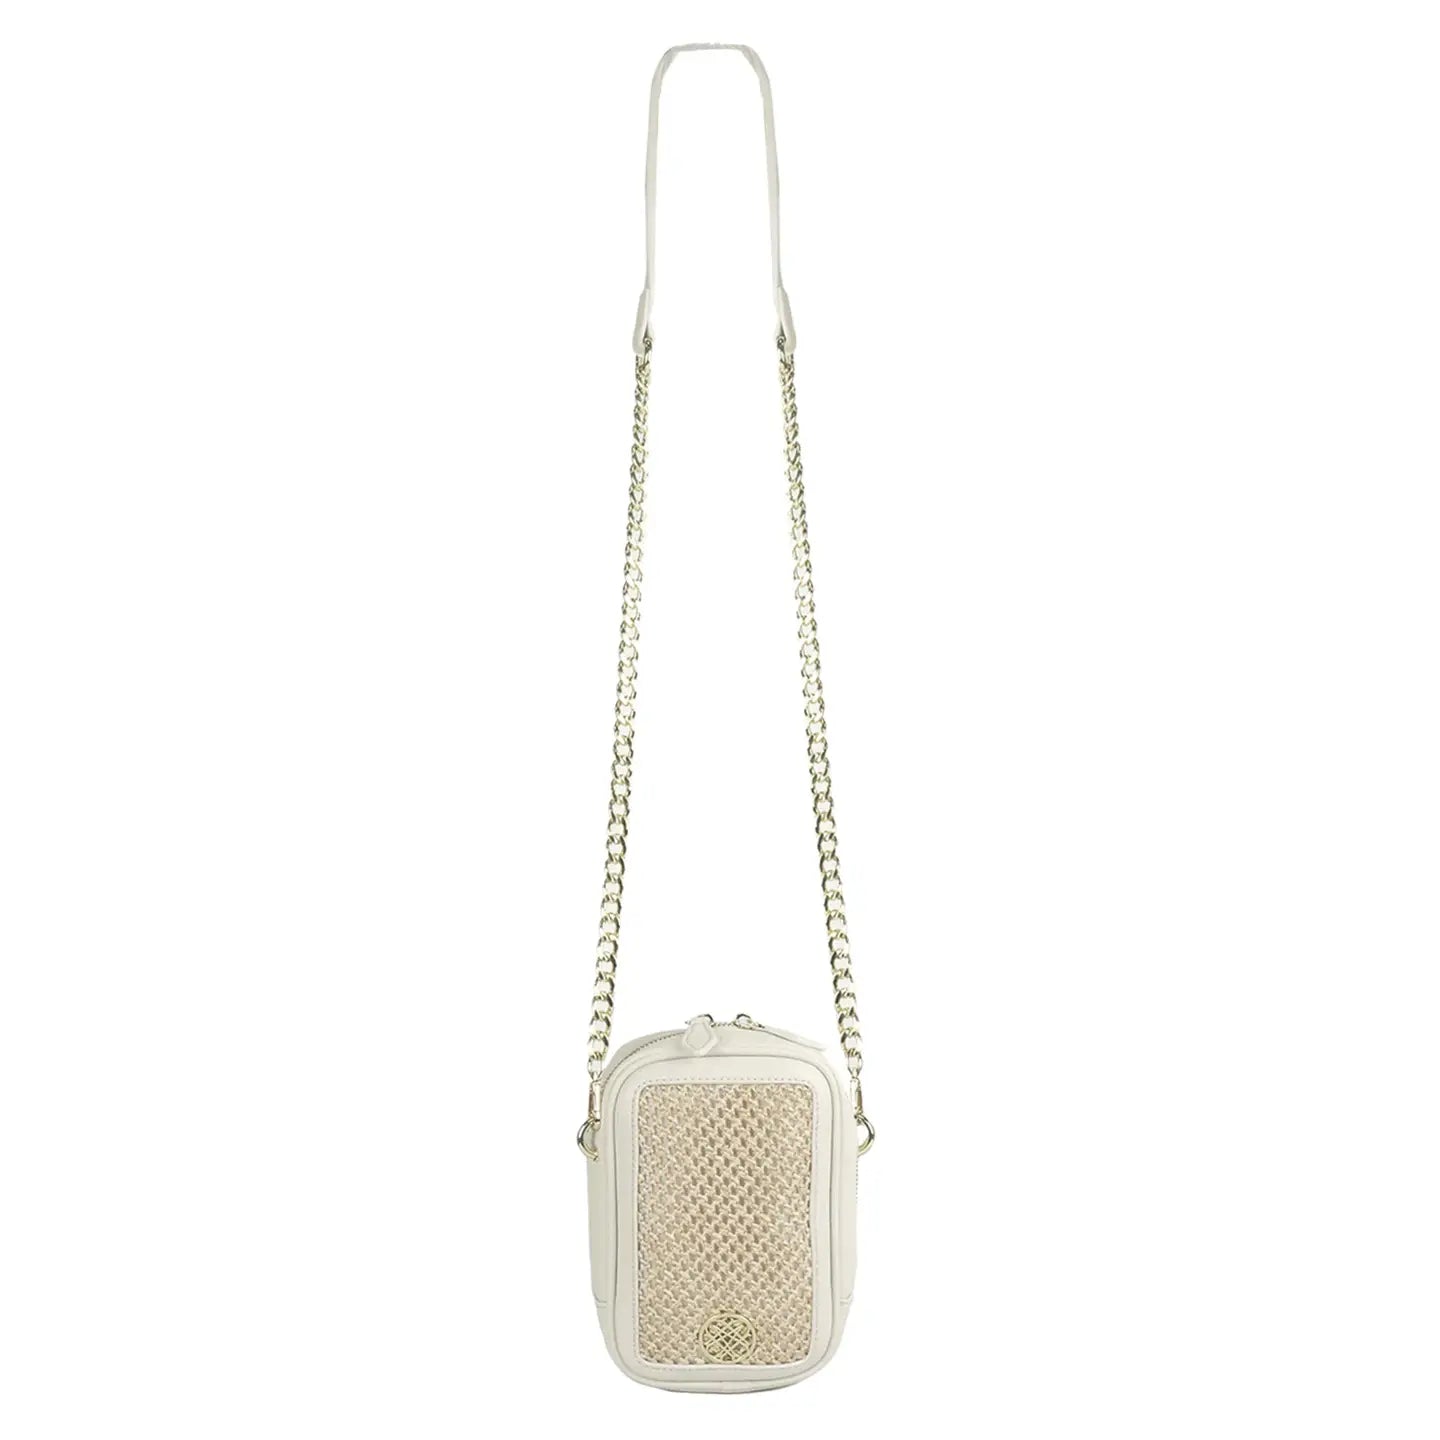 Natalie Wood - Grace Crossbody in Cream/Straw-130 Accessories-Natalie Wood-July & June Women's Fashion Boutique Located in San Antonio, Texas